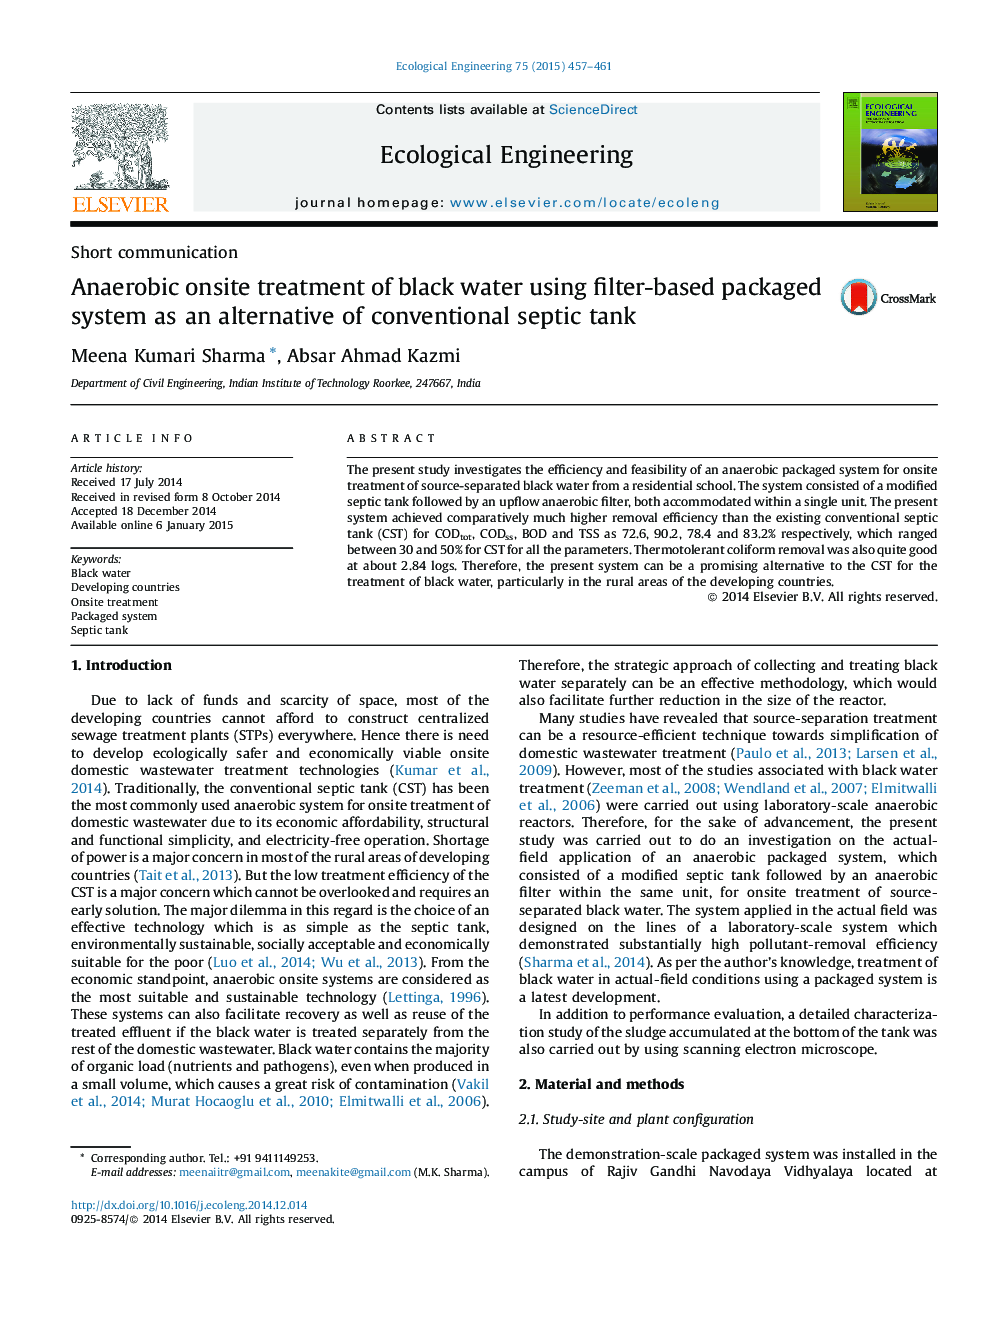 Short communicationAnaerobic onsite treatment of black water using filter-based packaged system as an alternative of conventional septic tank